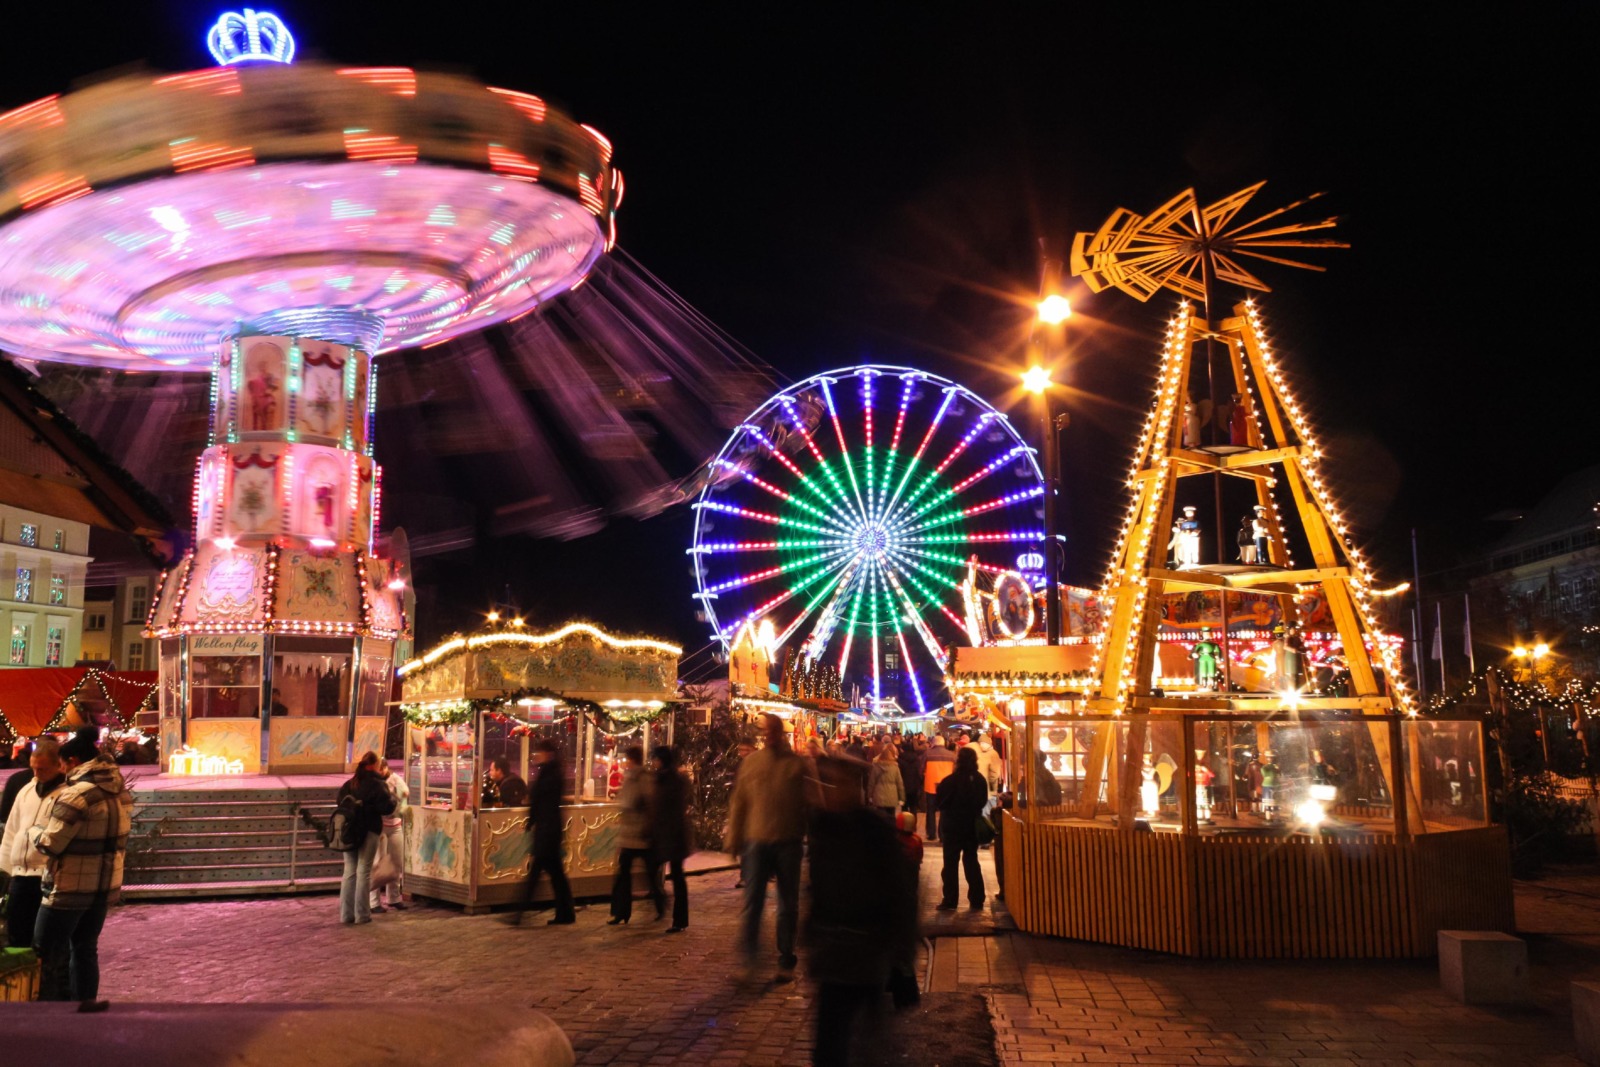 Christmas Markets in Germany - Rostock © Grand-Duc - licence [CC BY-SA 3.0de] from Wikimedia Commons